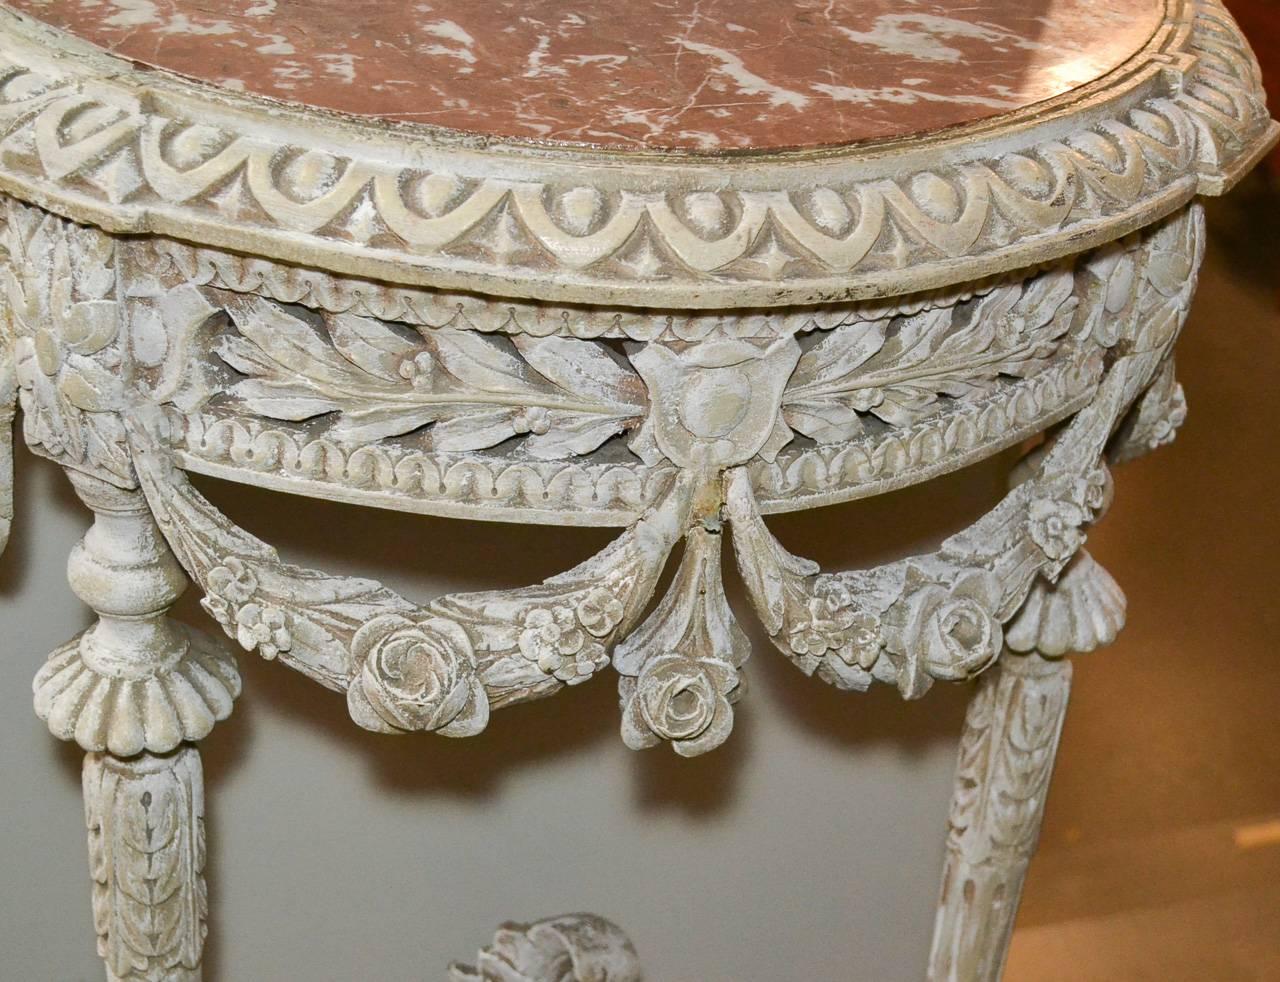 Delightful 19th century pair of French Louis XVI carved and painted consoles. Having wonderfully carved frames with reticulated aprons, swag, urn and floral stretchers, fluted tapered legs, and lovely incarnate turquin marble tops. Ready for your